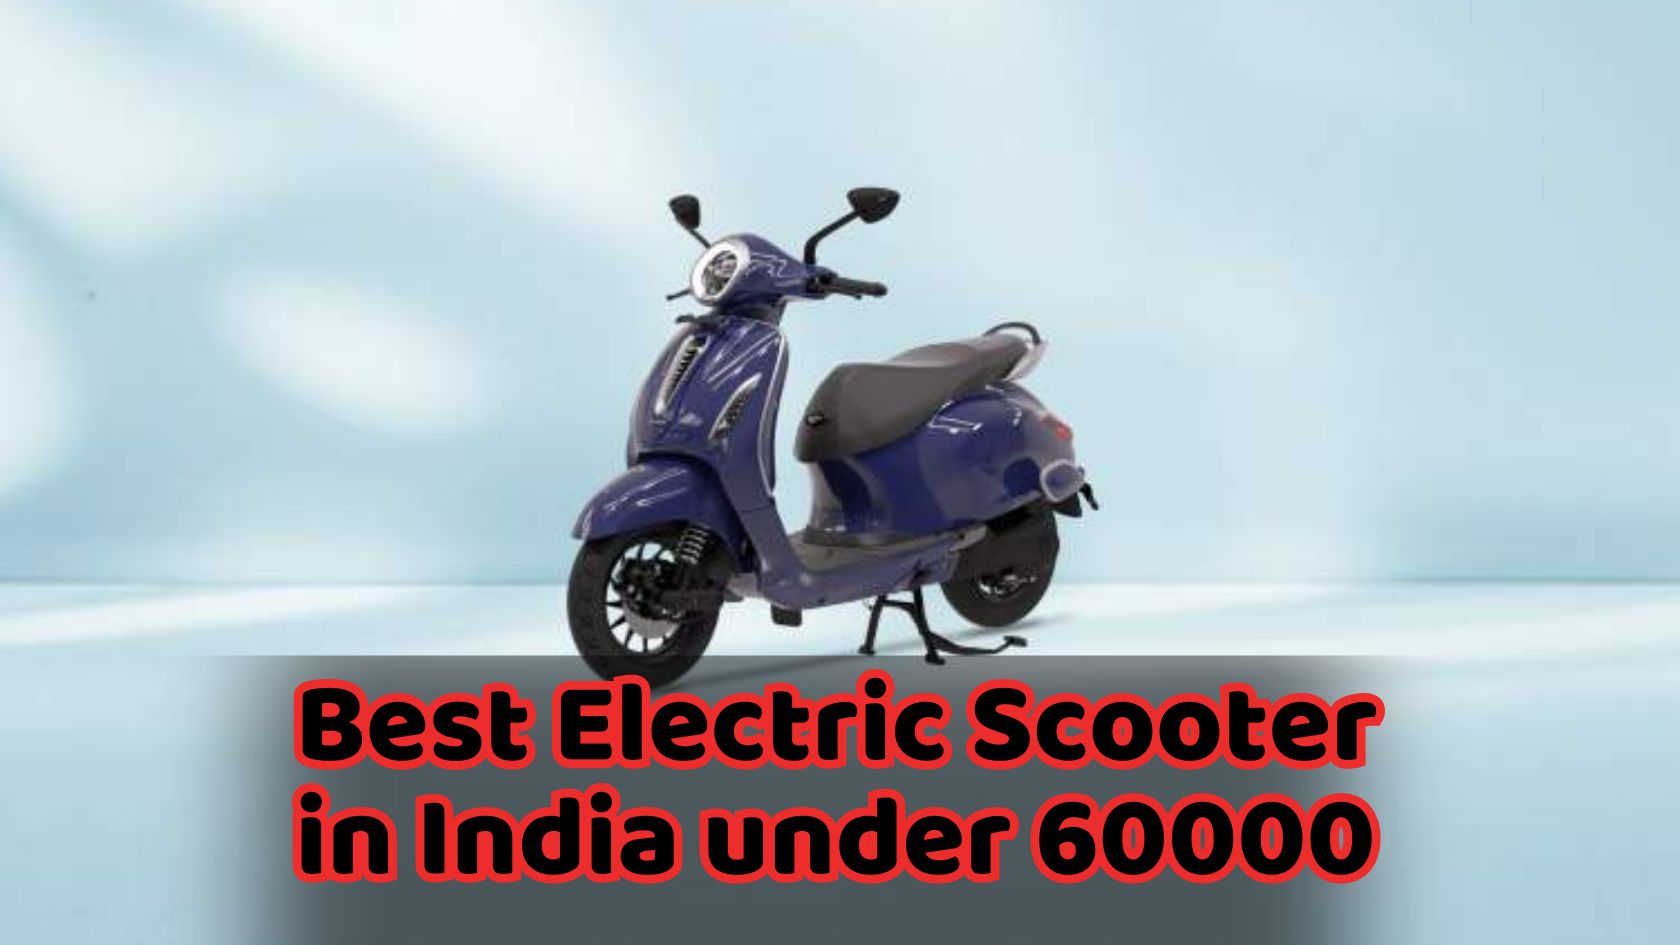 Best Electric Scooter in India under 60000